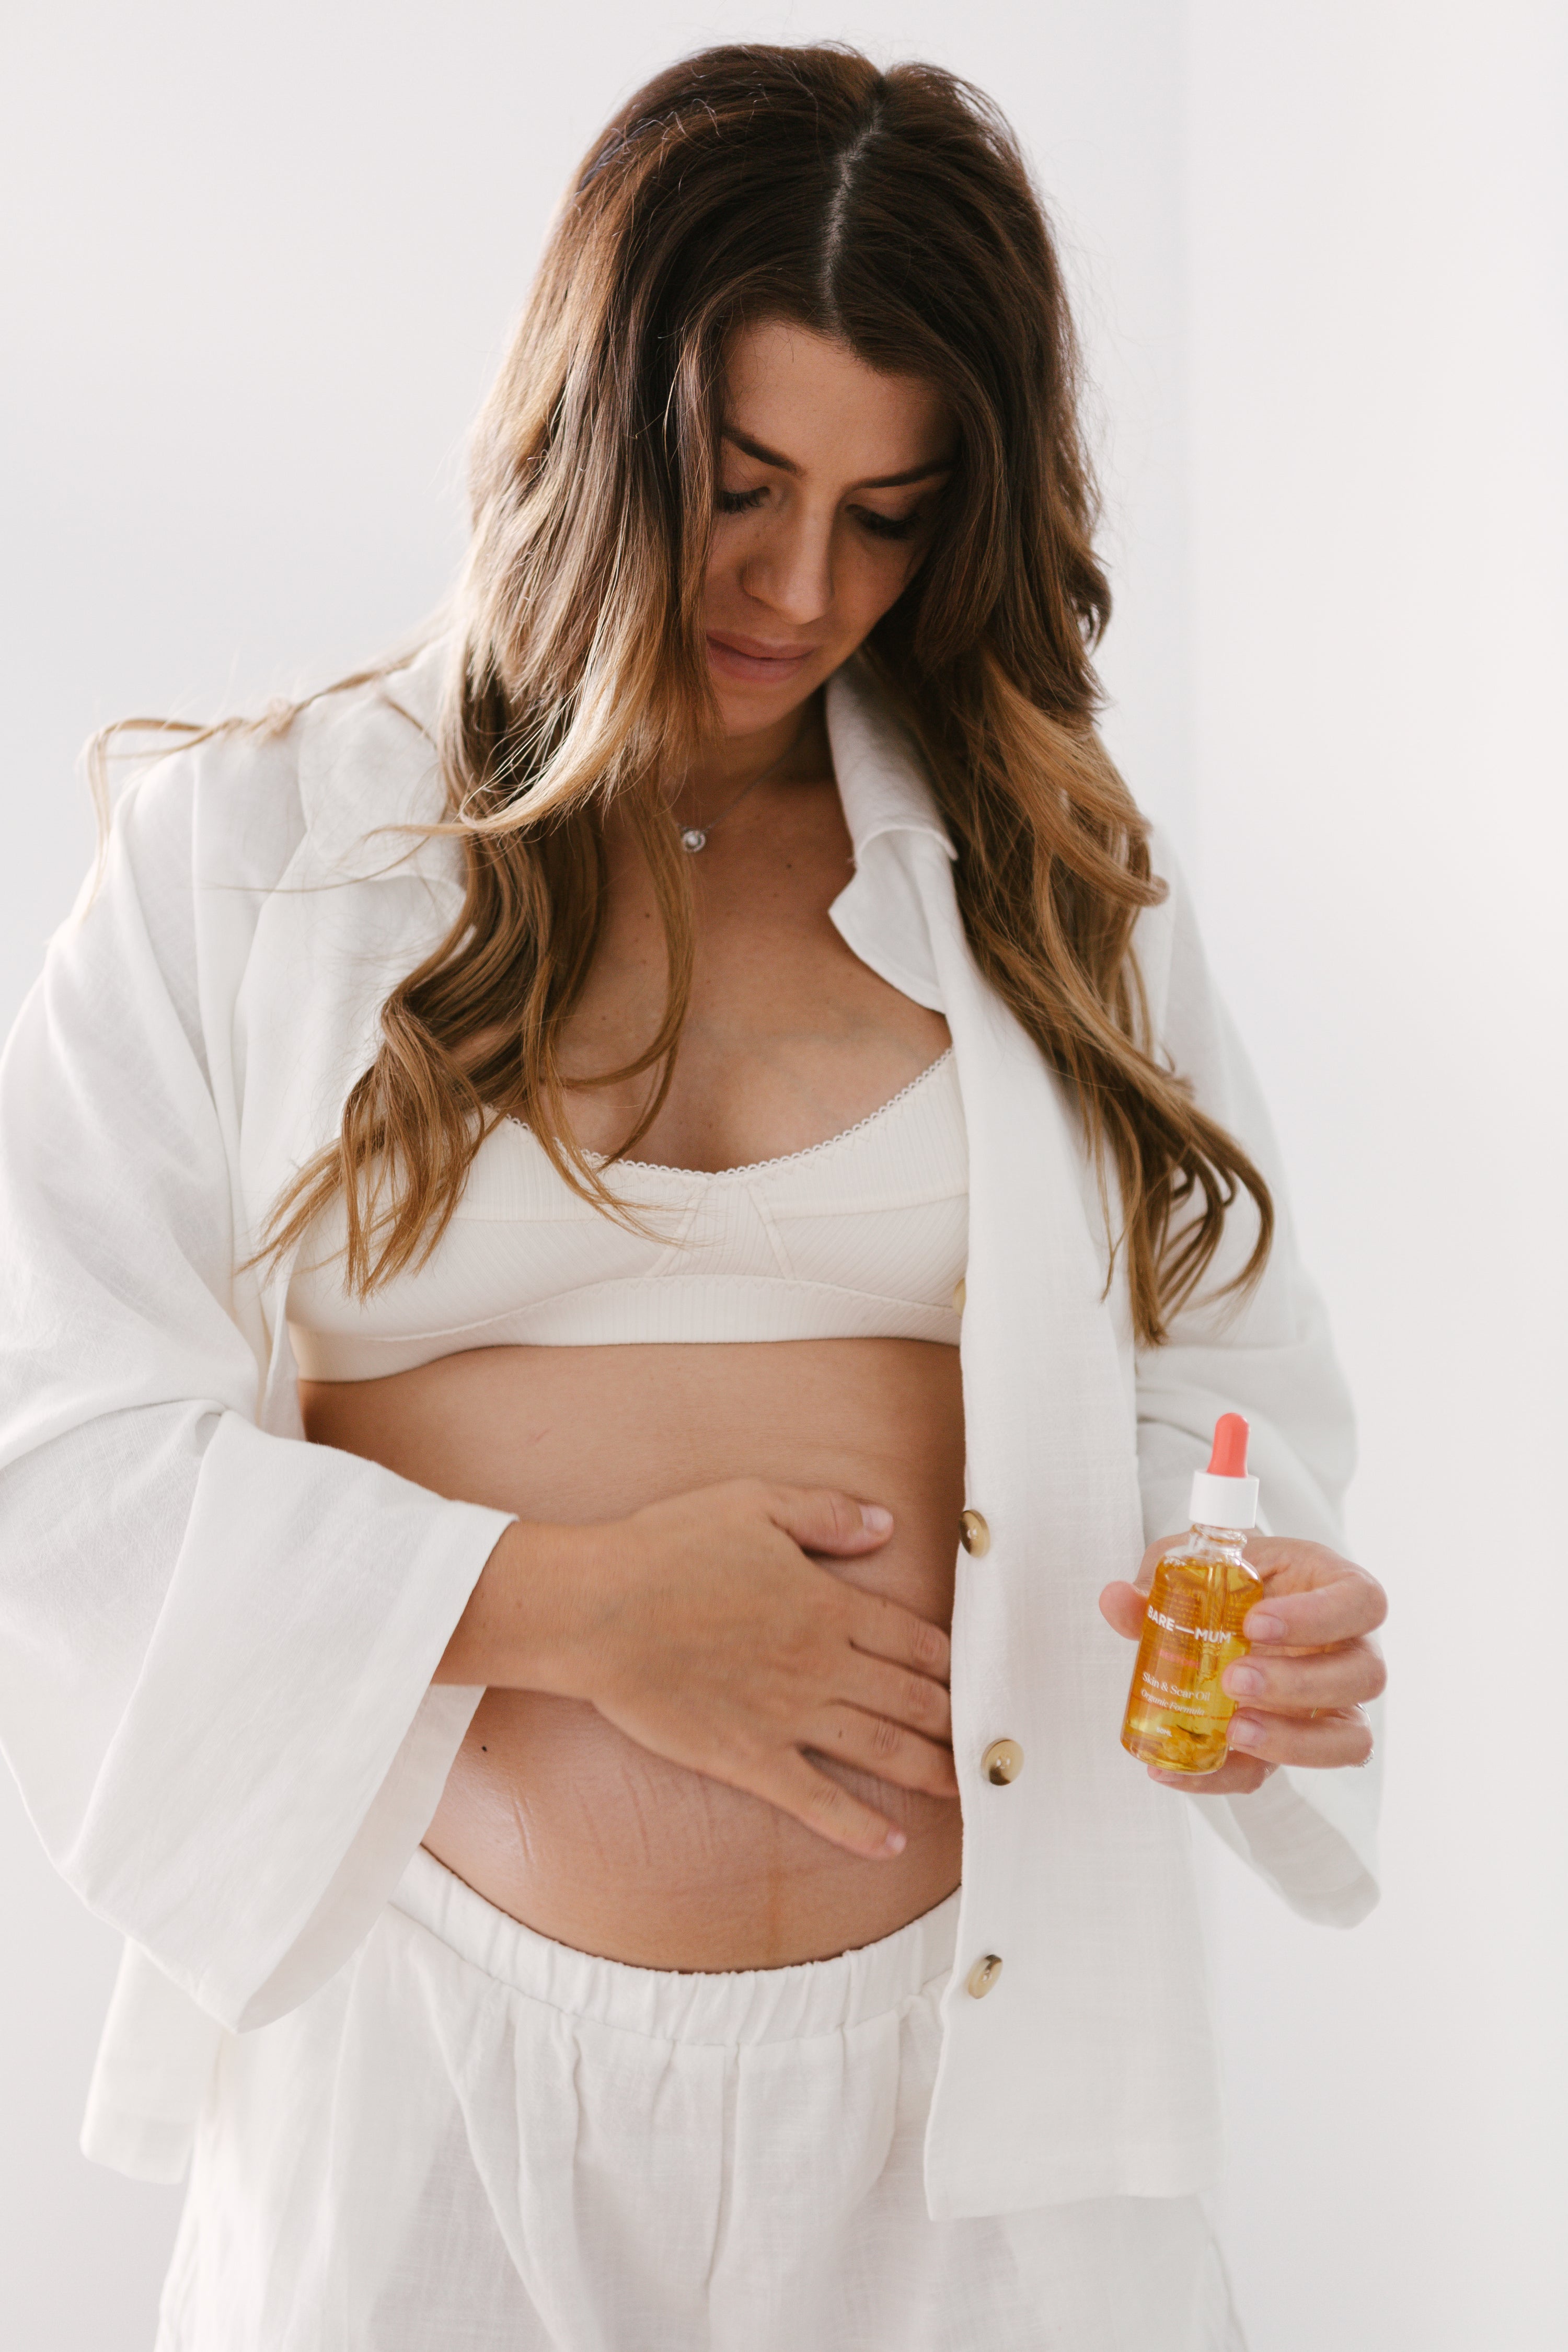 A pregnant woman holding a bottle of oil.